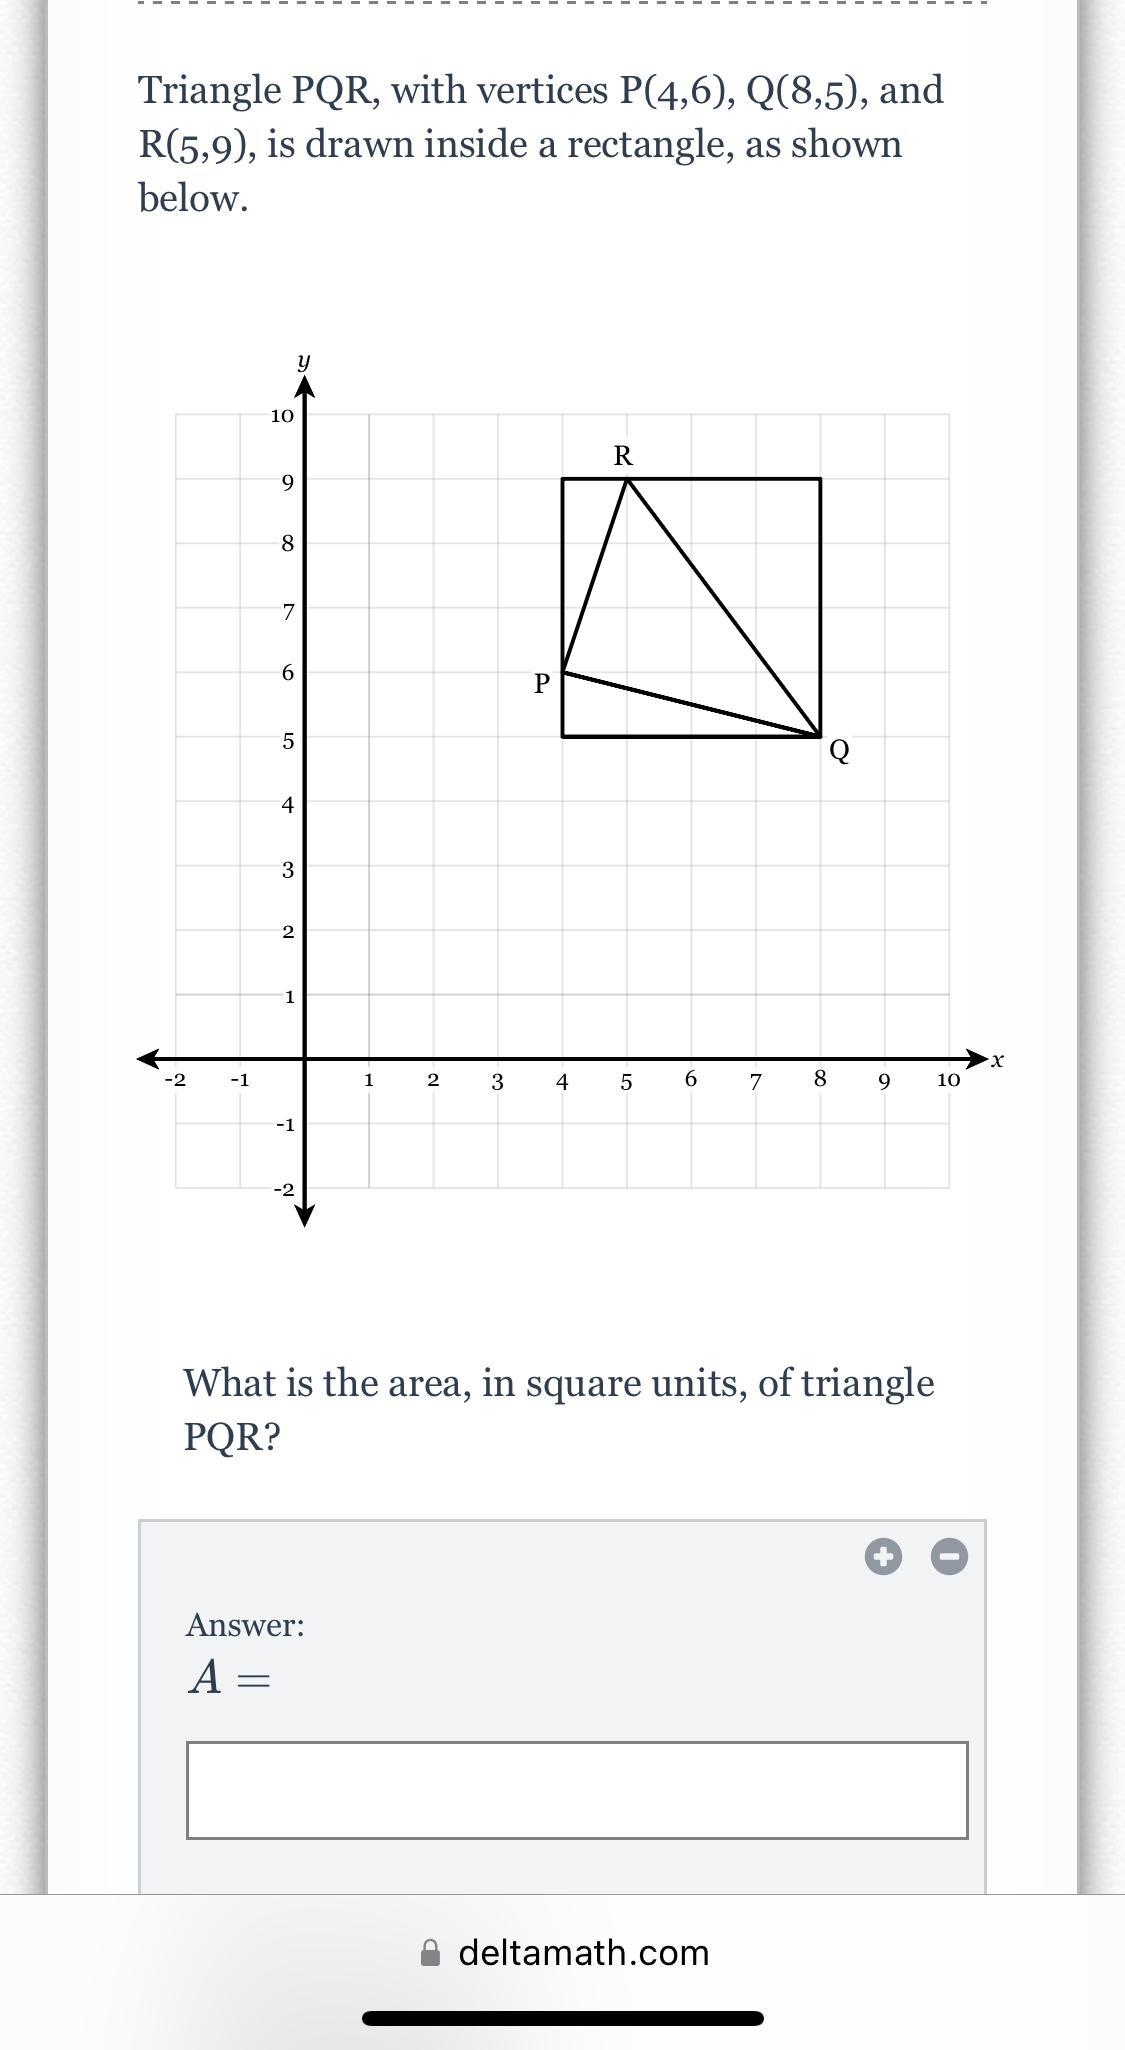 Triangle PQR, With Vertices P(4,6), Q(8,5), And R(5,9), Is Drawn Inside A Rectangle, As Shown Below.